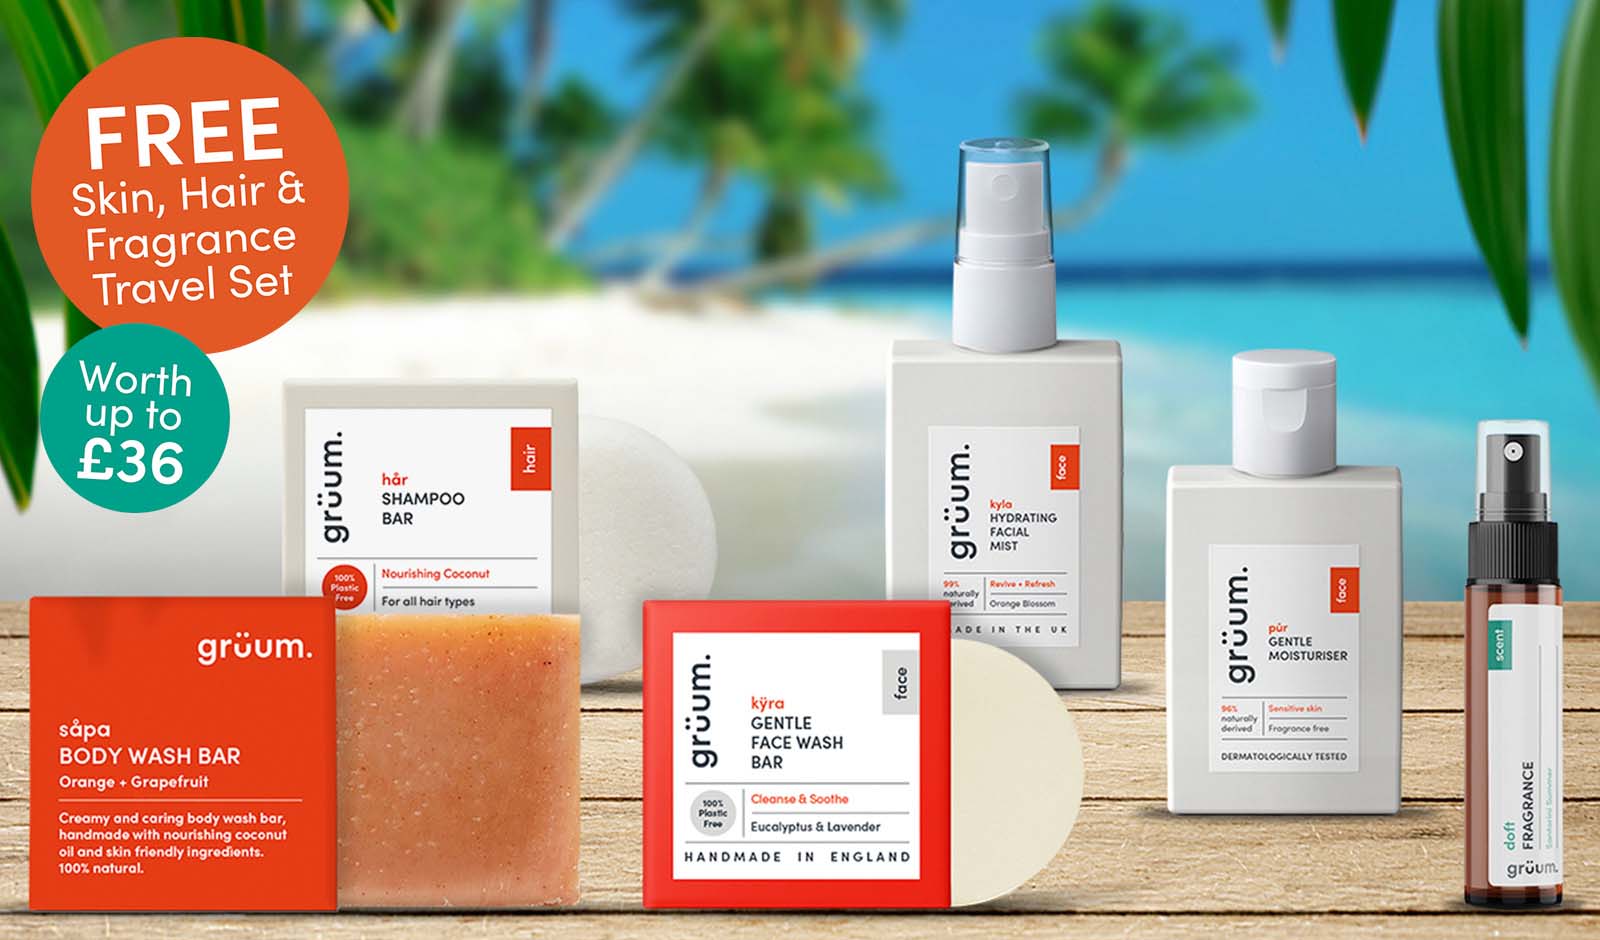 FREE Travel Friendly Skin, Hair and Fragrance Set worth up to £36!